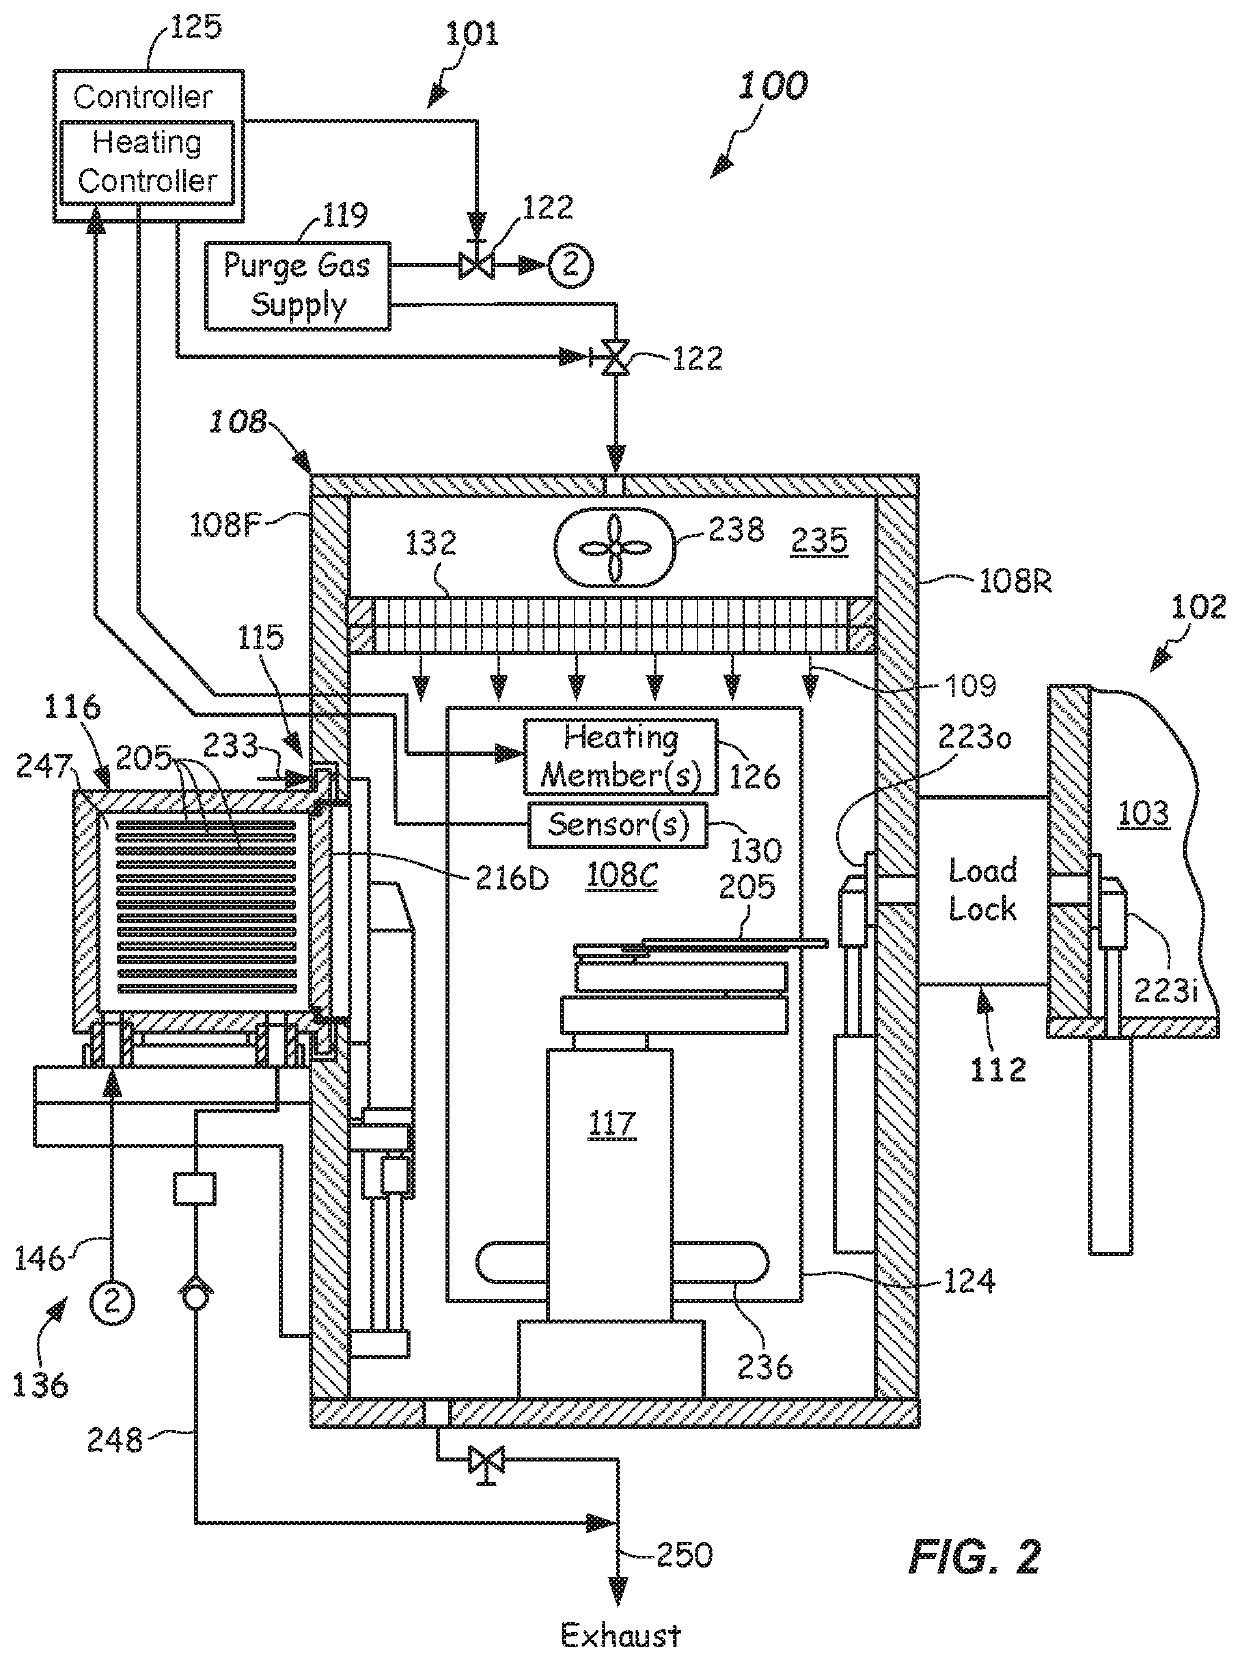 Substrate manufacturing apparatus and methods with factory interface chamber heating